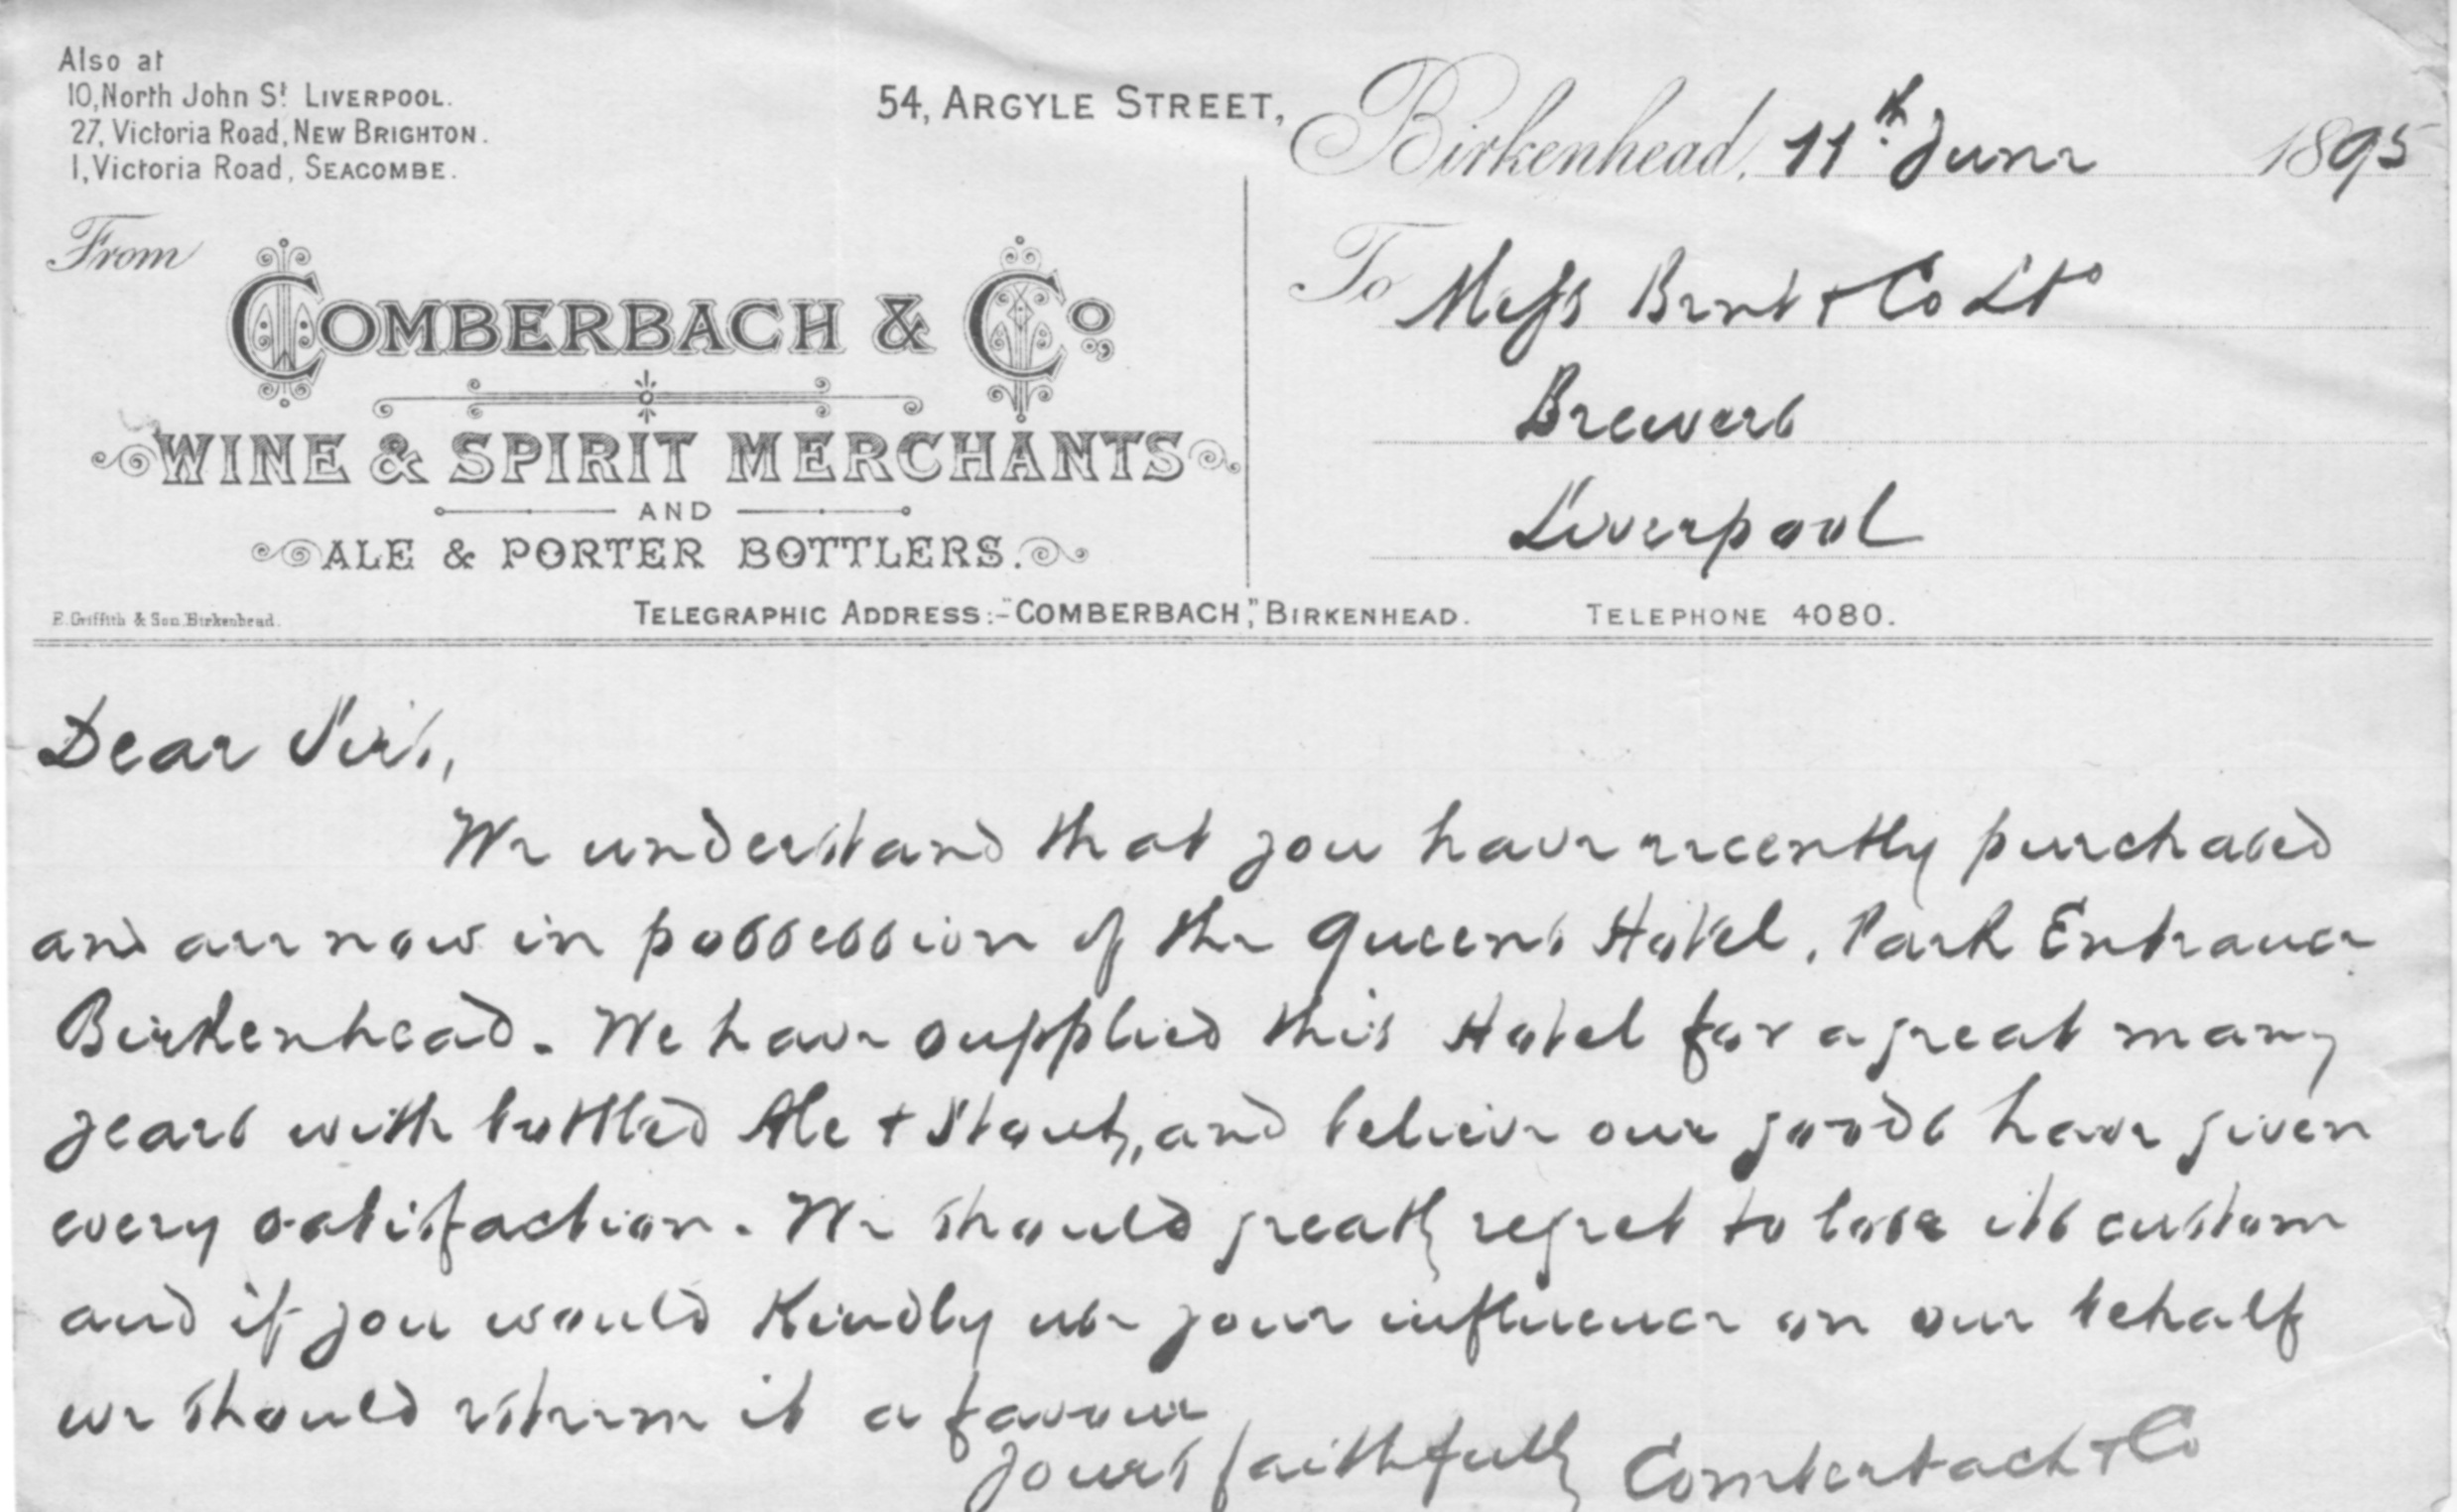 Cumberbatch Family History - Comberbach & Co Letter